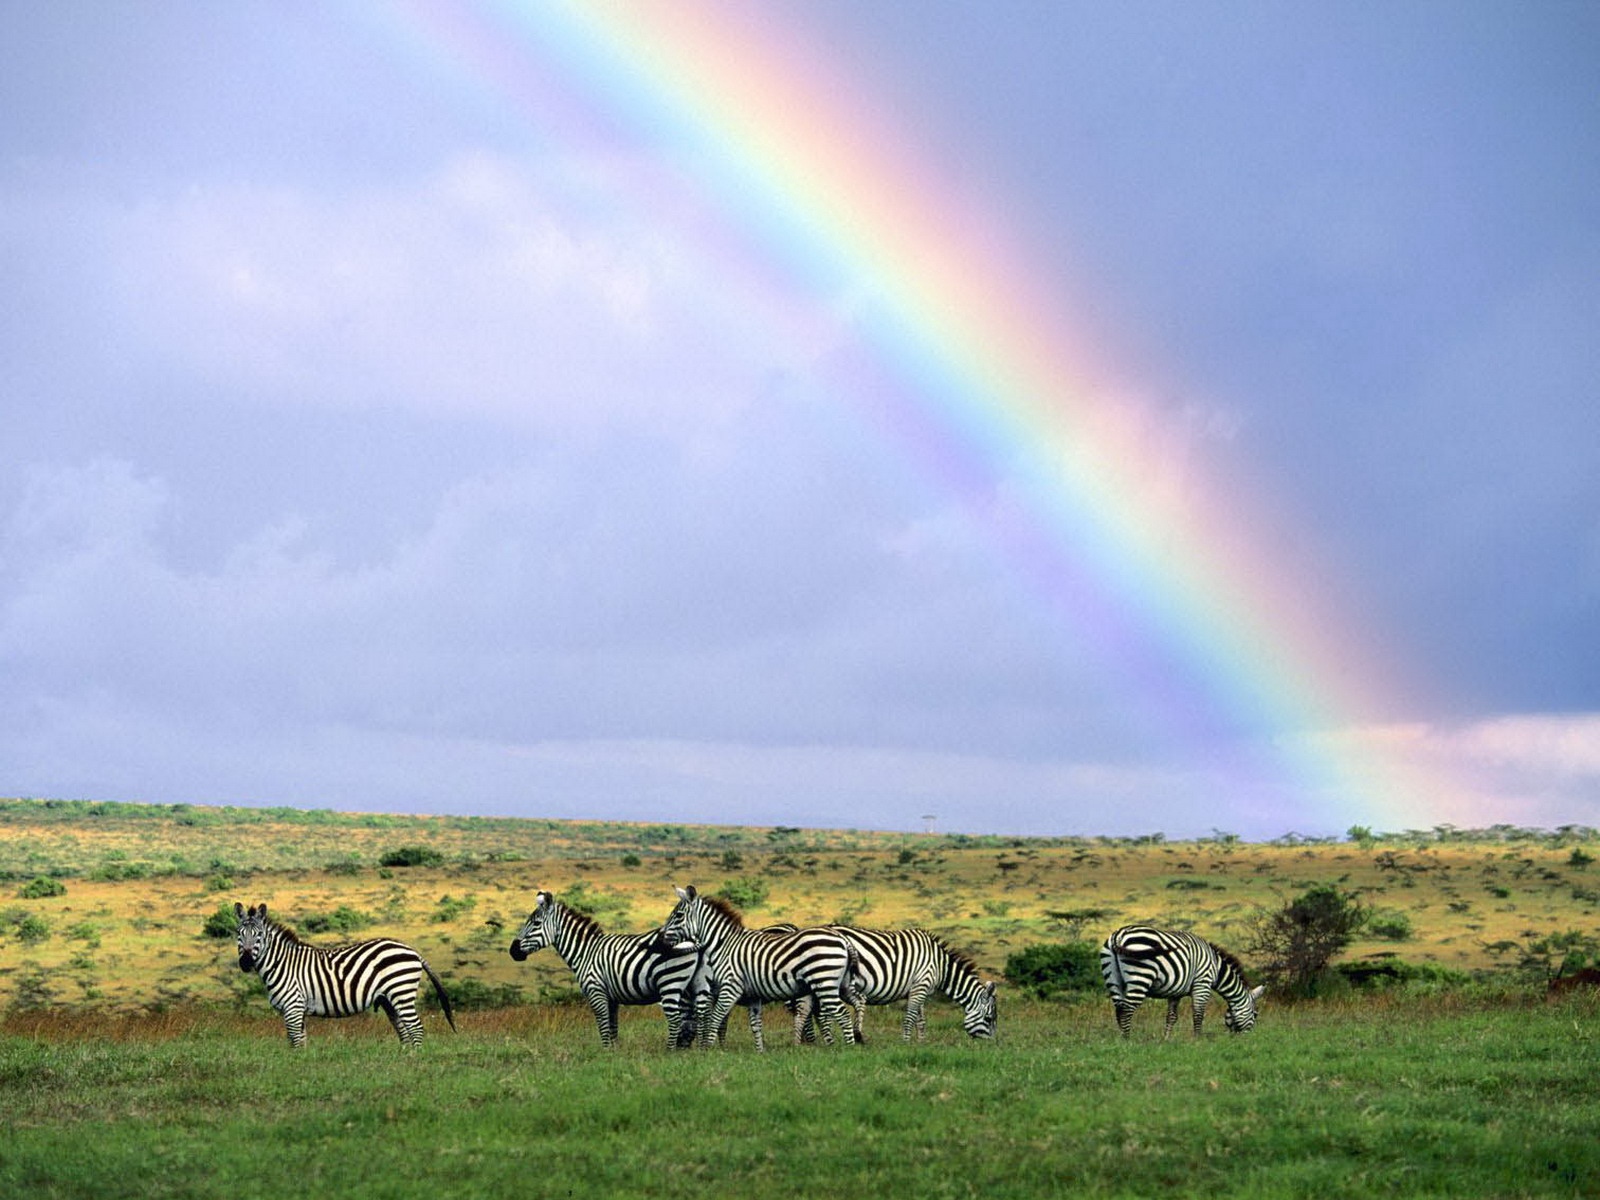 Wallpaper Zebras, Wild Nature, Rainbow, After Rain - Covenant Meaning - HD Wallpaper 